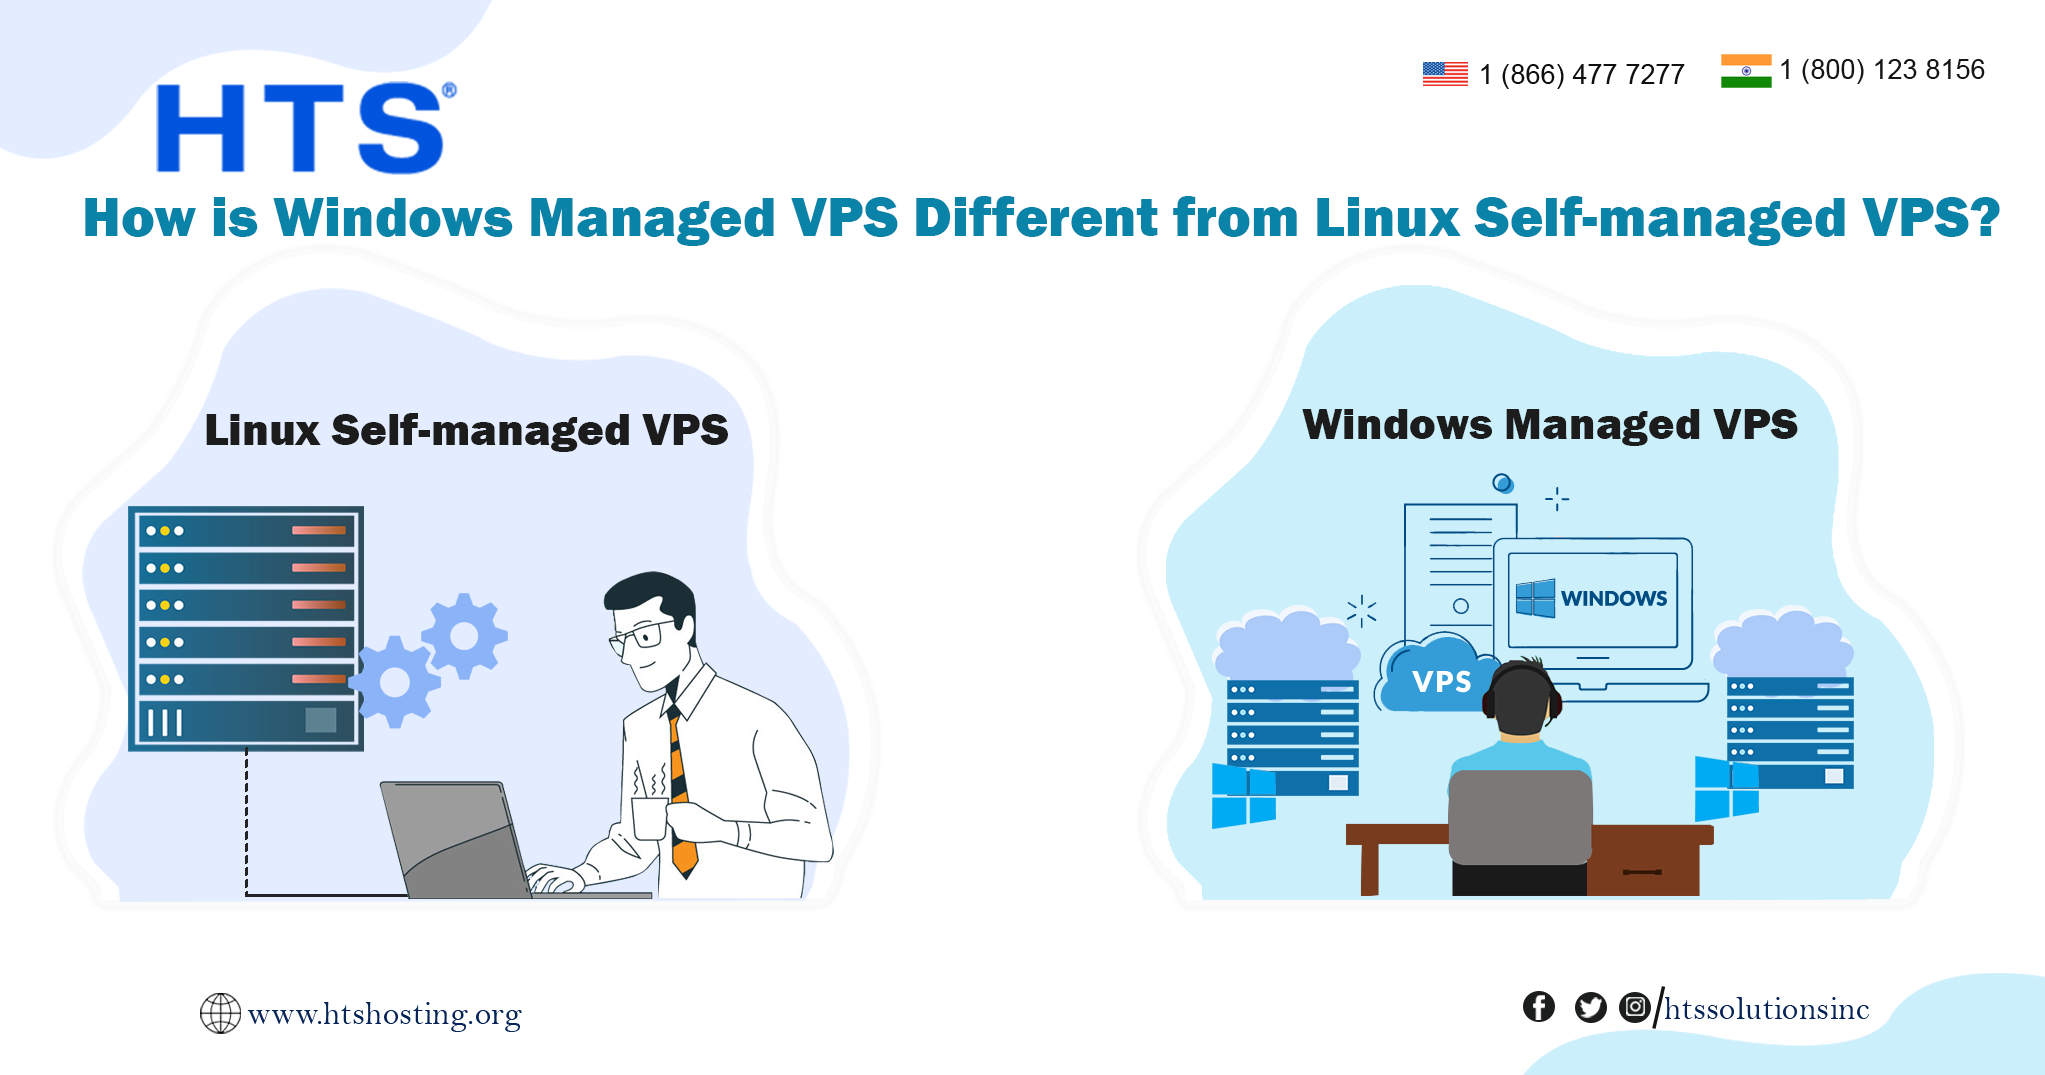 How Is Windows Managed VPS Different from Linux Self-managed VPS?